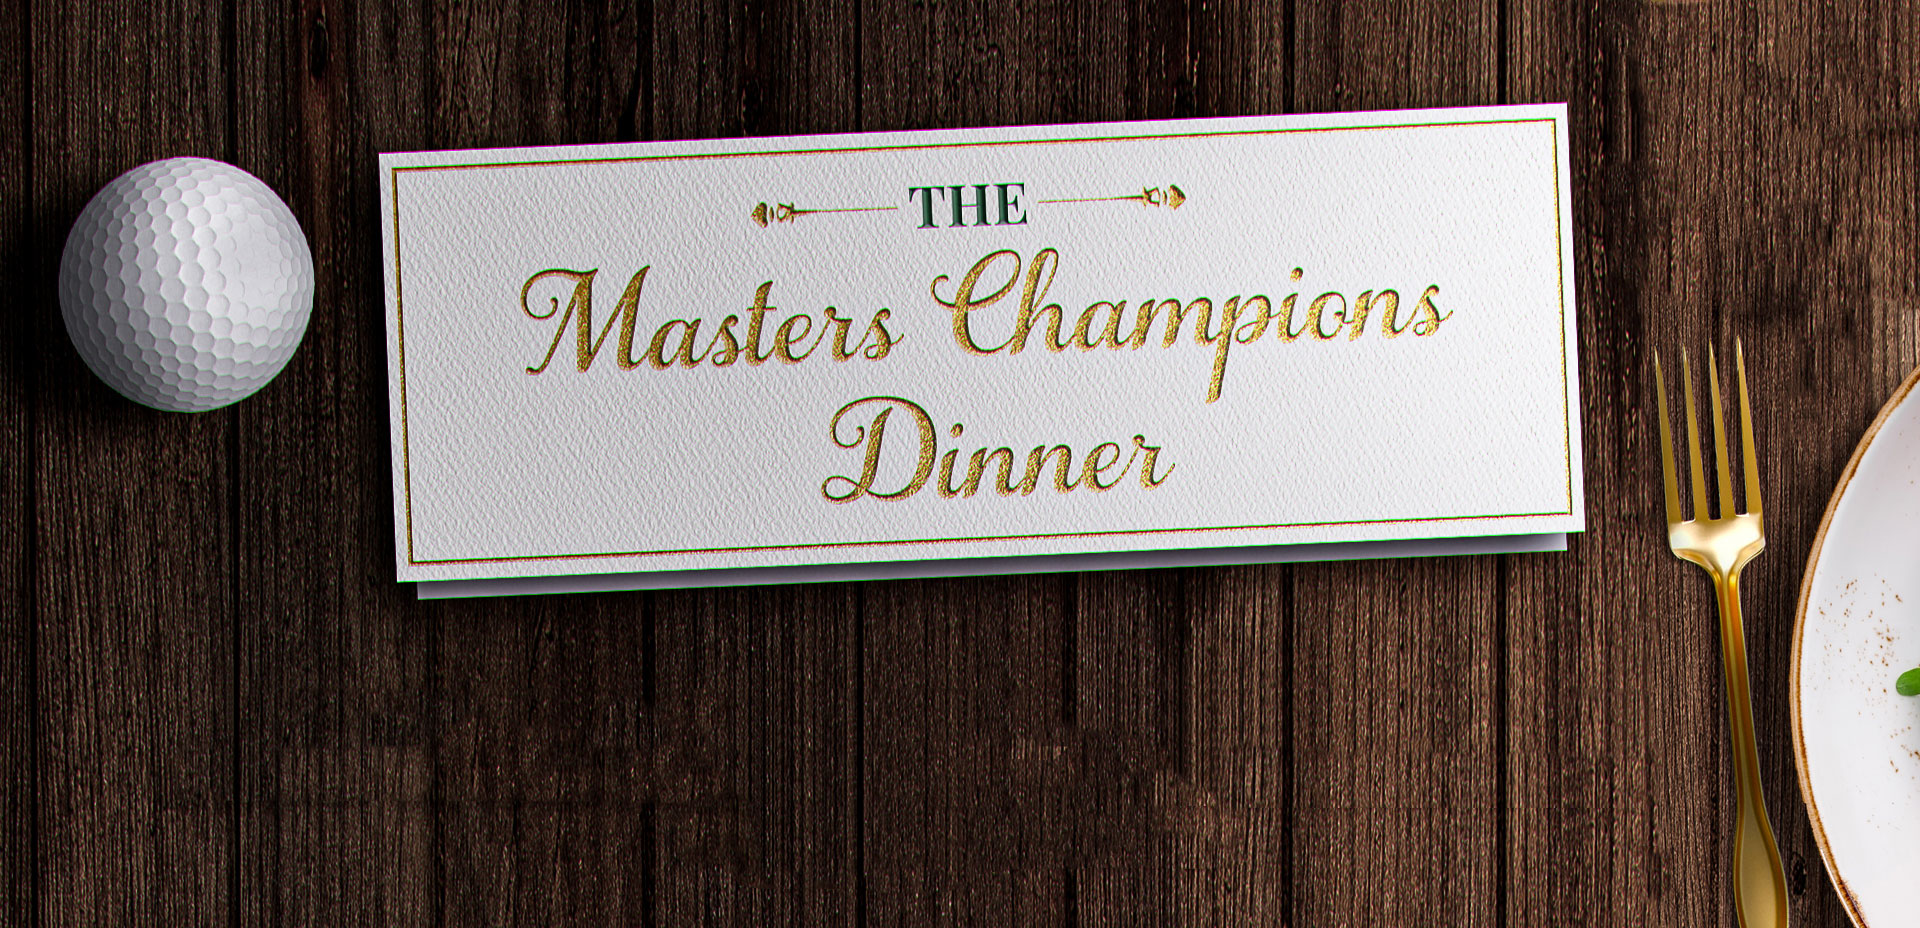 The Annual Masters Champions Dinner